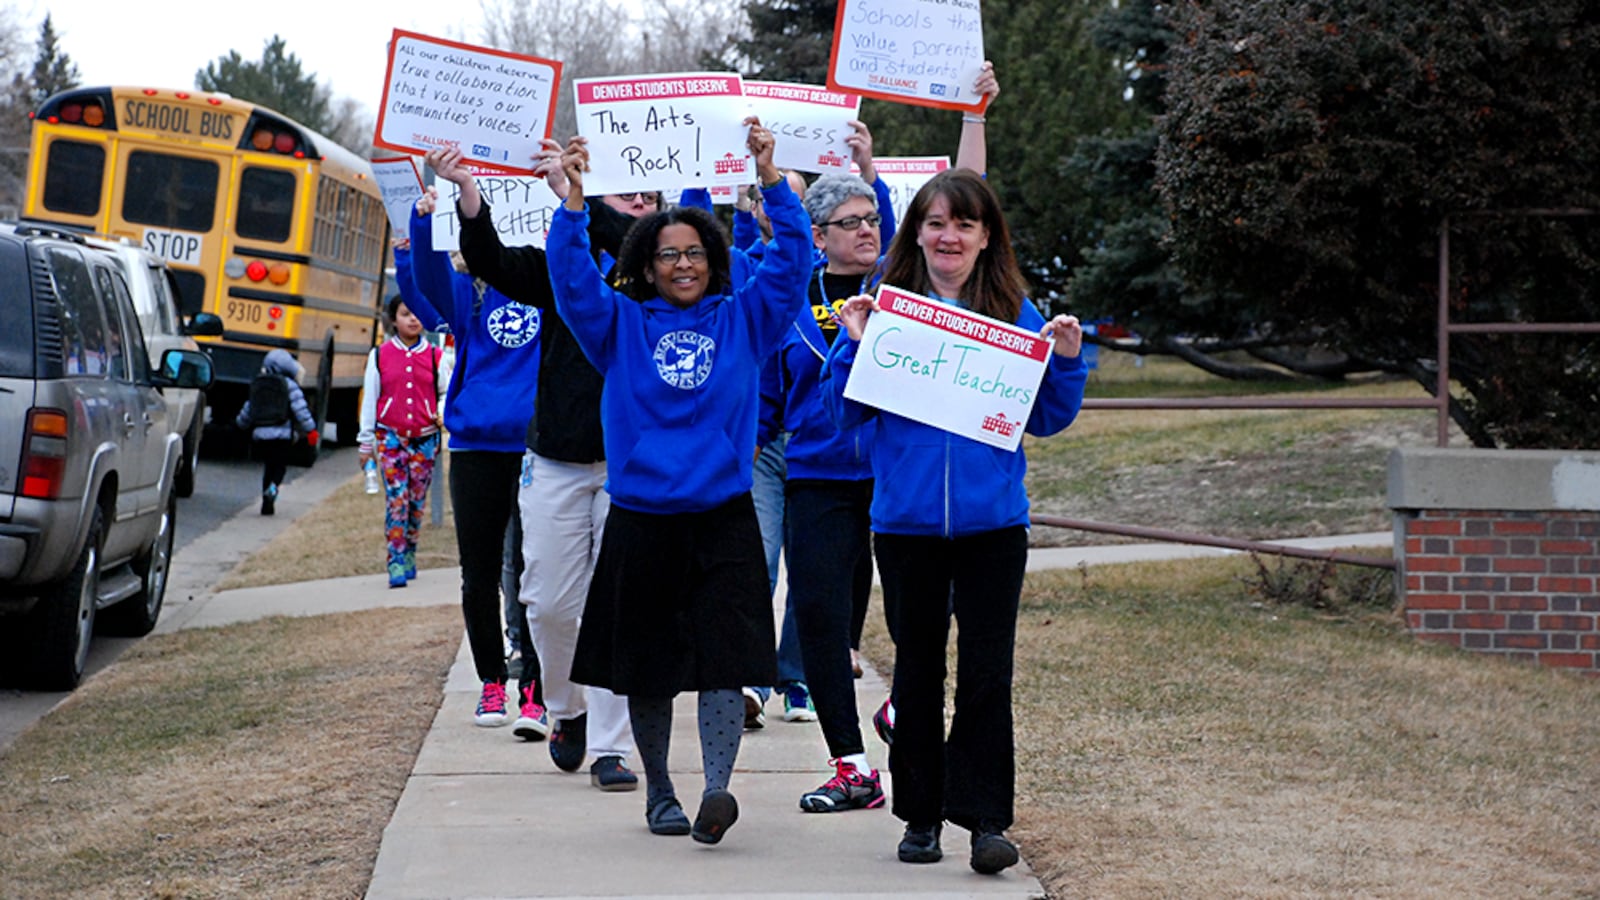 Teachers at Beach Court Elementary School in northwest Denver marched outside their school Wednesday morning. They were met by a group of parents. The rally was part of a nationwide effort to bring attention to public schools.